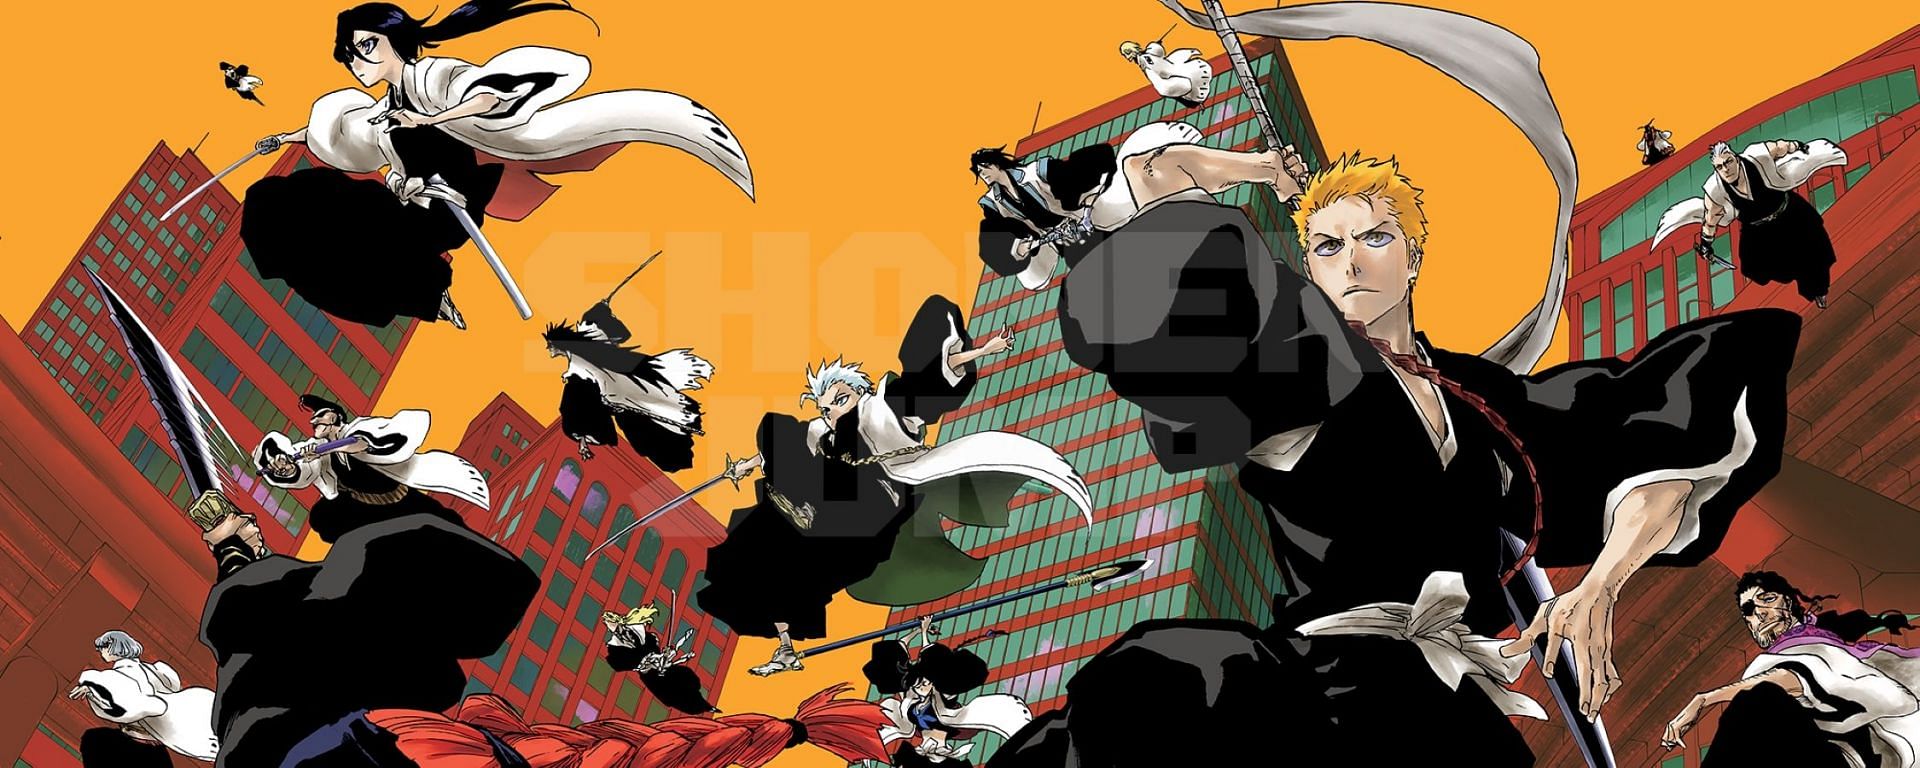 Bleach: No Breaths From The Jaws of Hell illustration (Image via Tite Kubo)